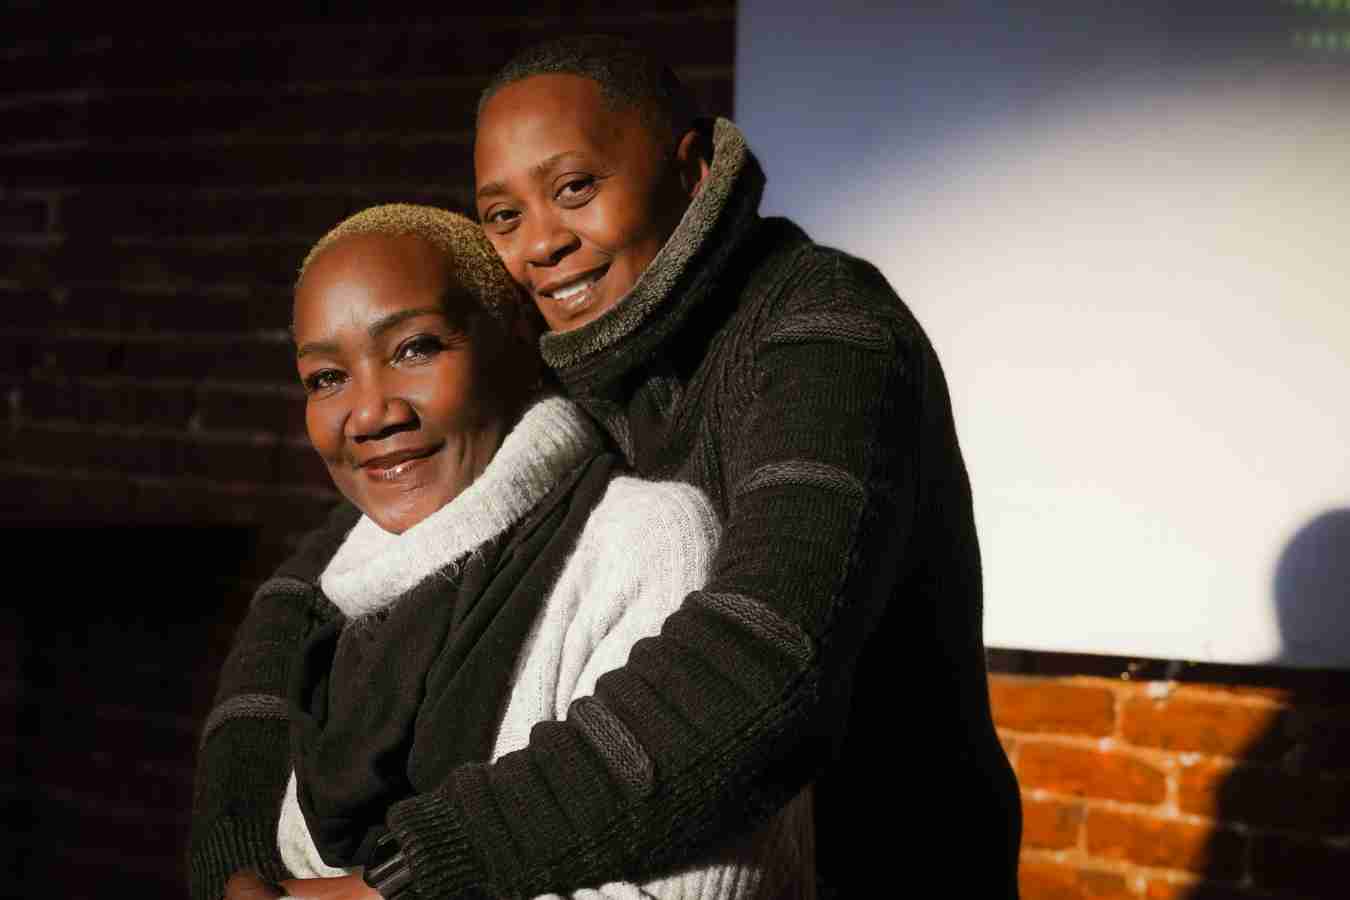 Photo of Leola and Rhonda for the Joy of Pride Power Box art in the district